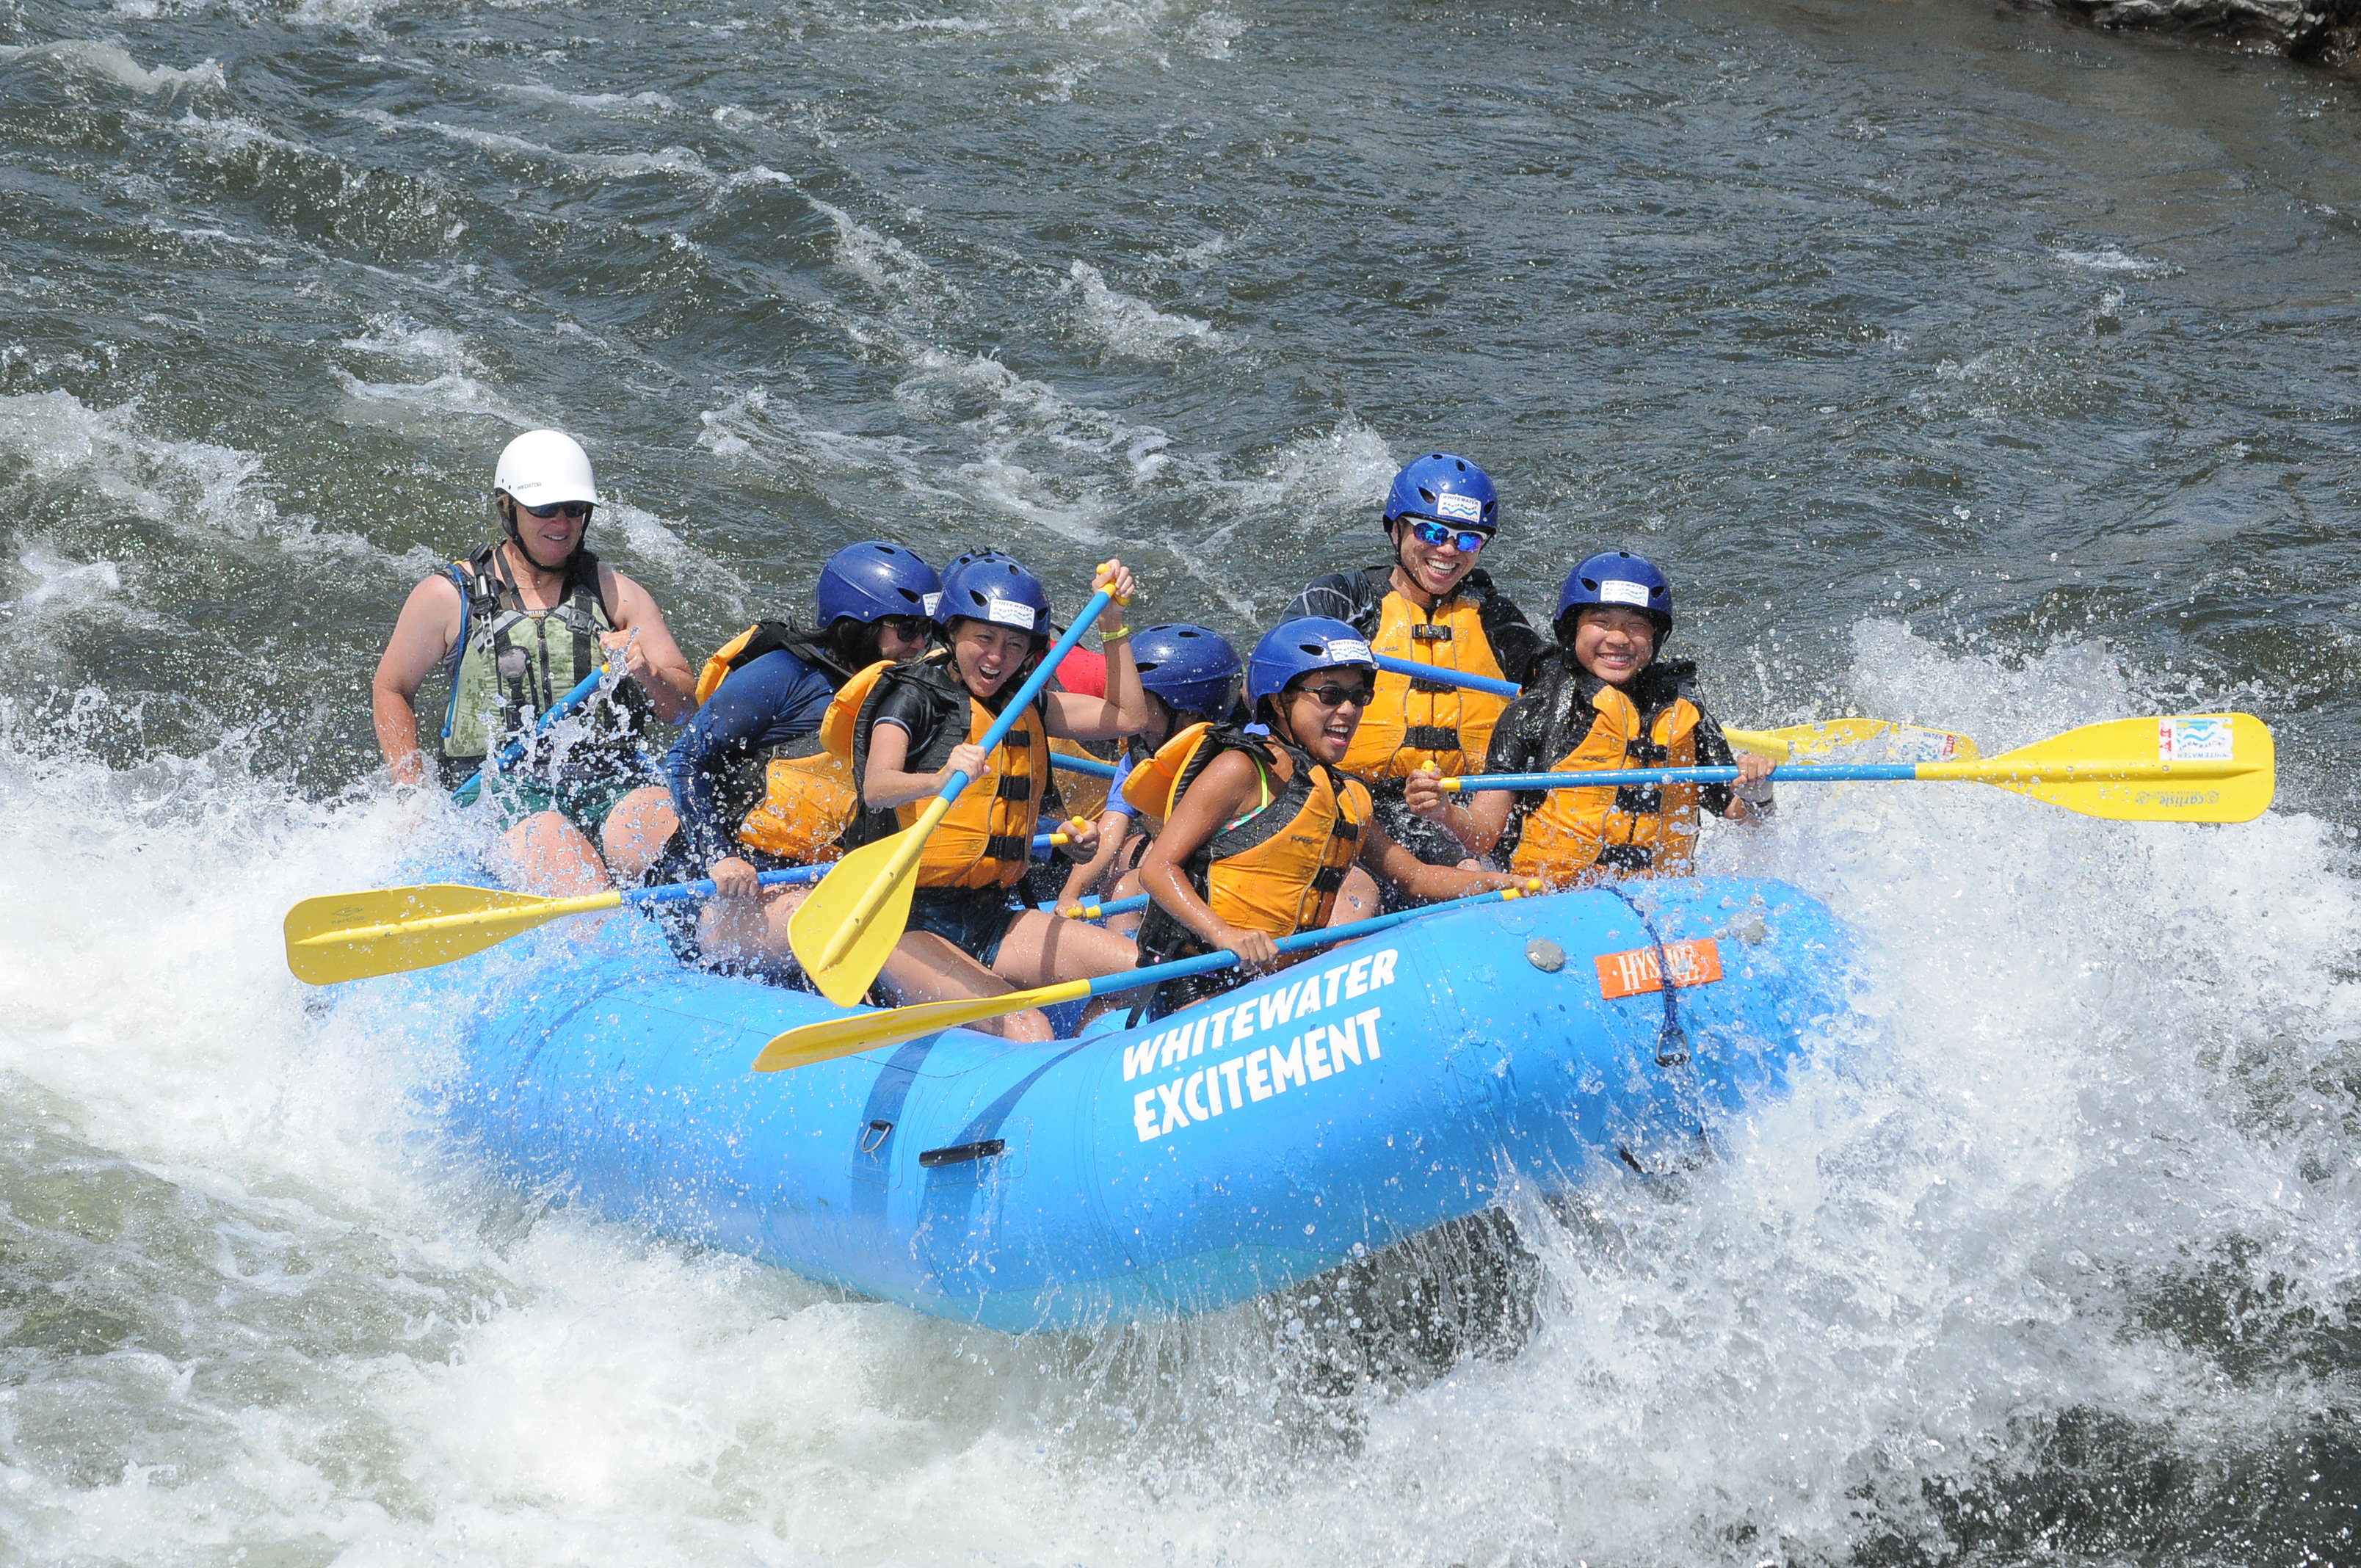 Best White Water Rafting Day Trips Near Los Angeles - CBS Los Angeles